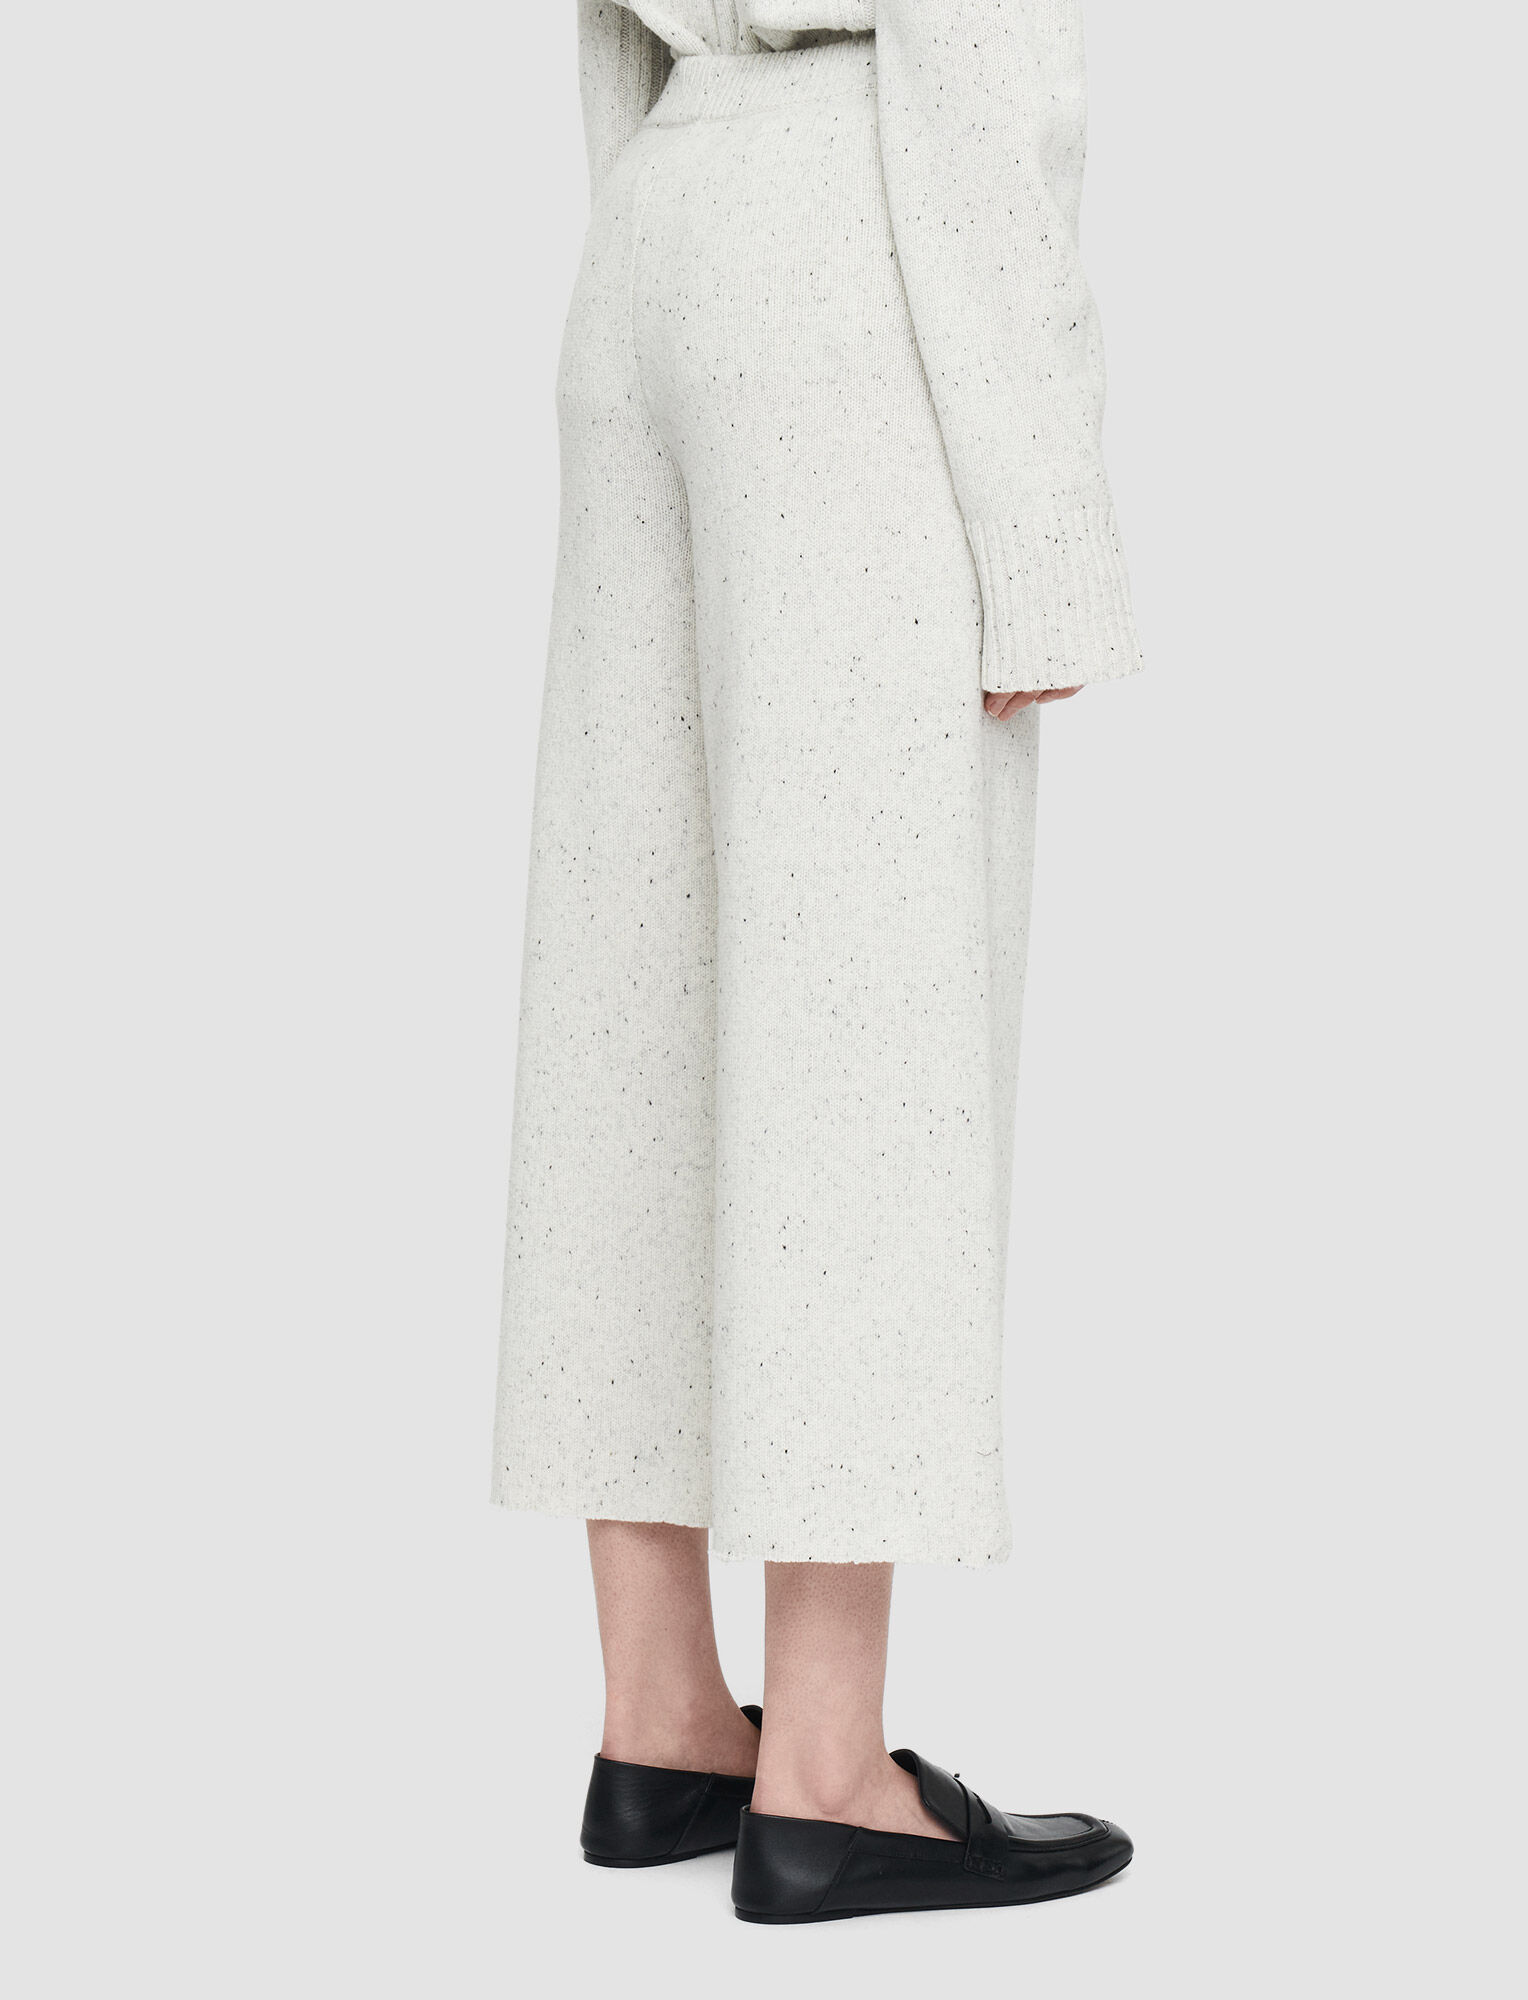 Joseph, Tweed Knit Culottes, in Ivory